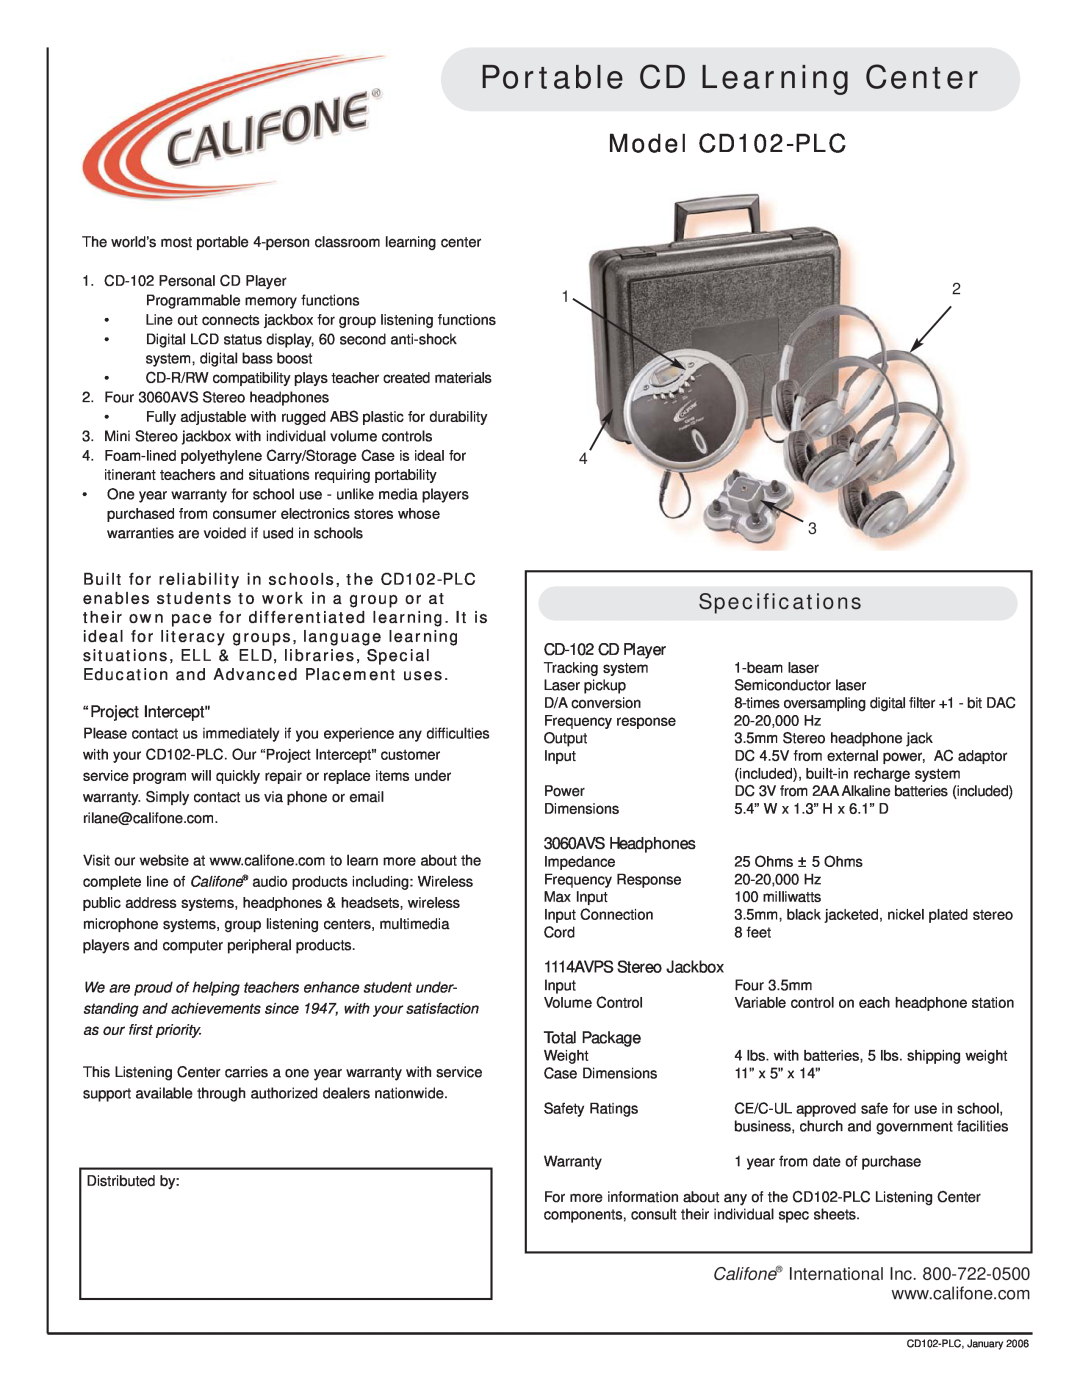 Califone specifications Portable CD Learning Center, Model CD102-PLC, Specifications, “Project Intercept, Total Package 